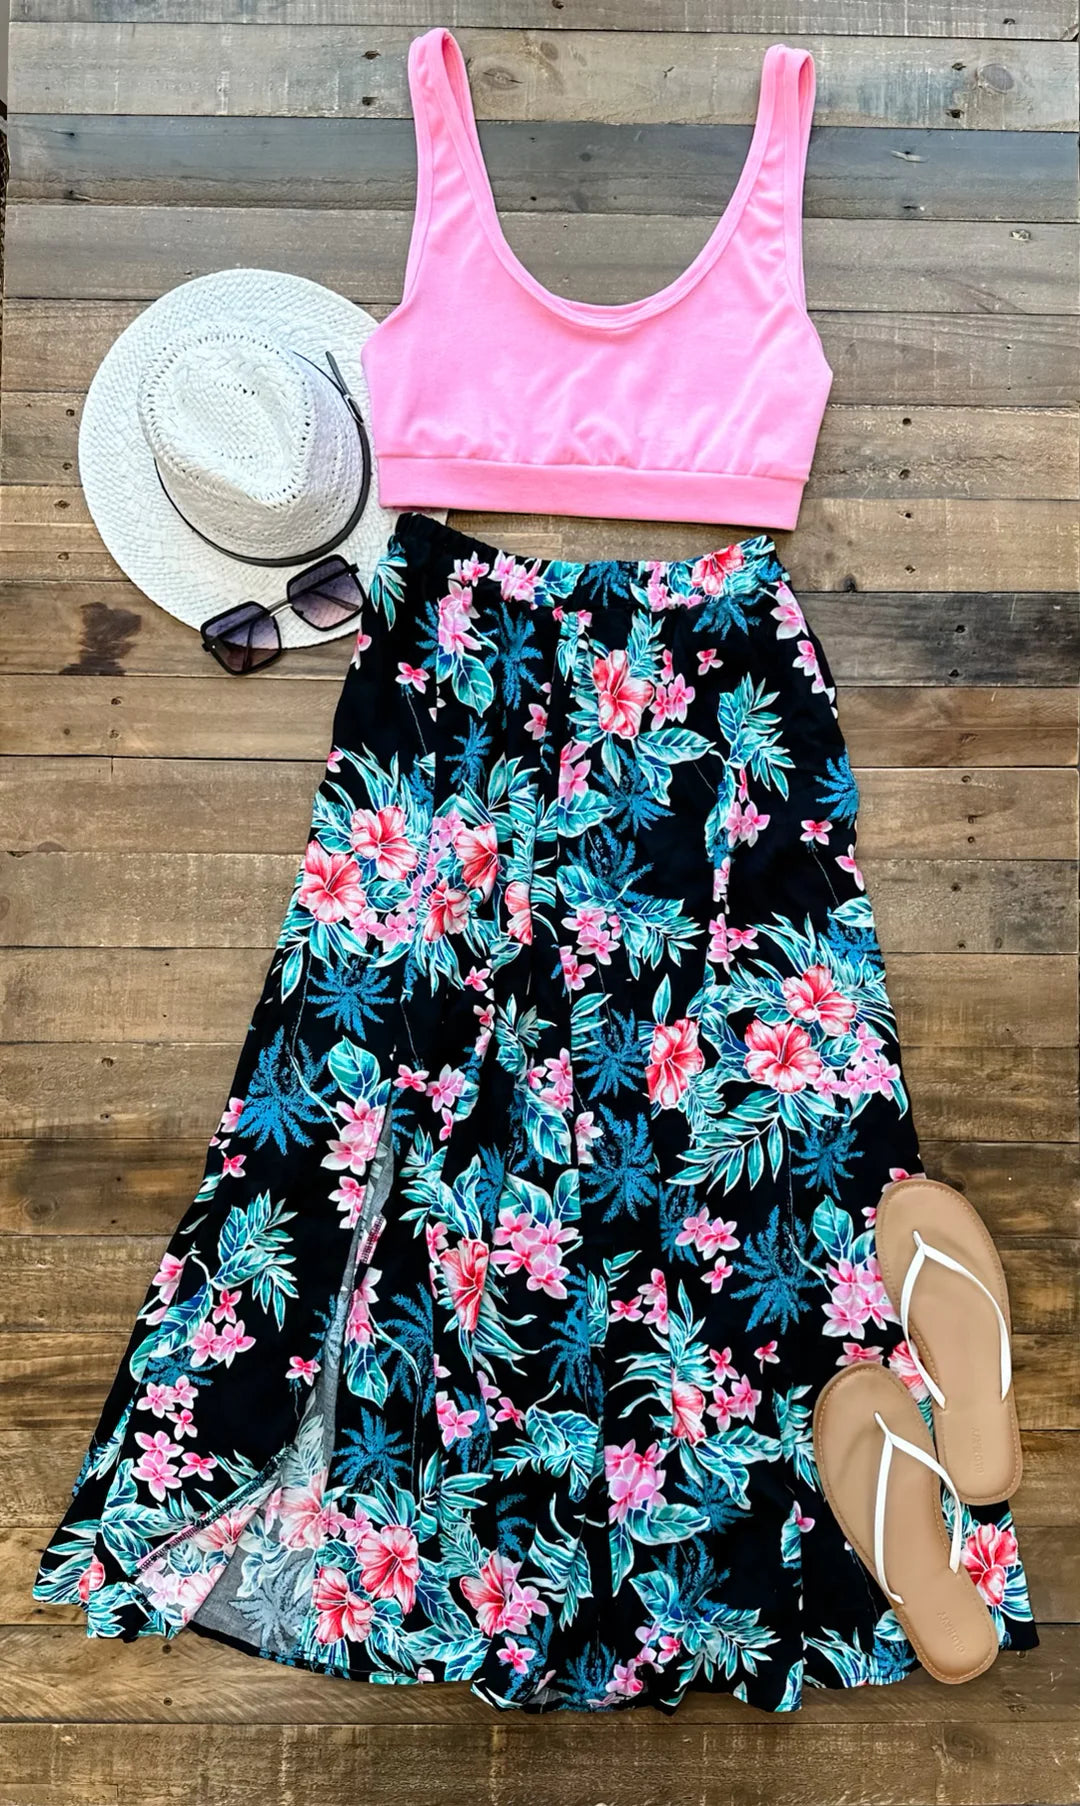 Lost in Paradise Skirt